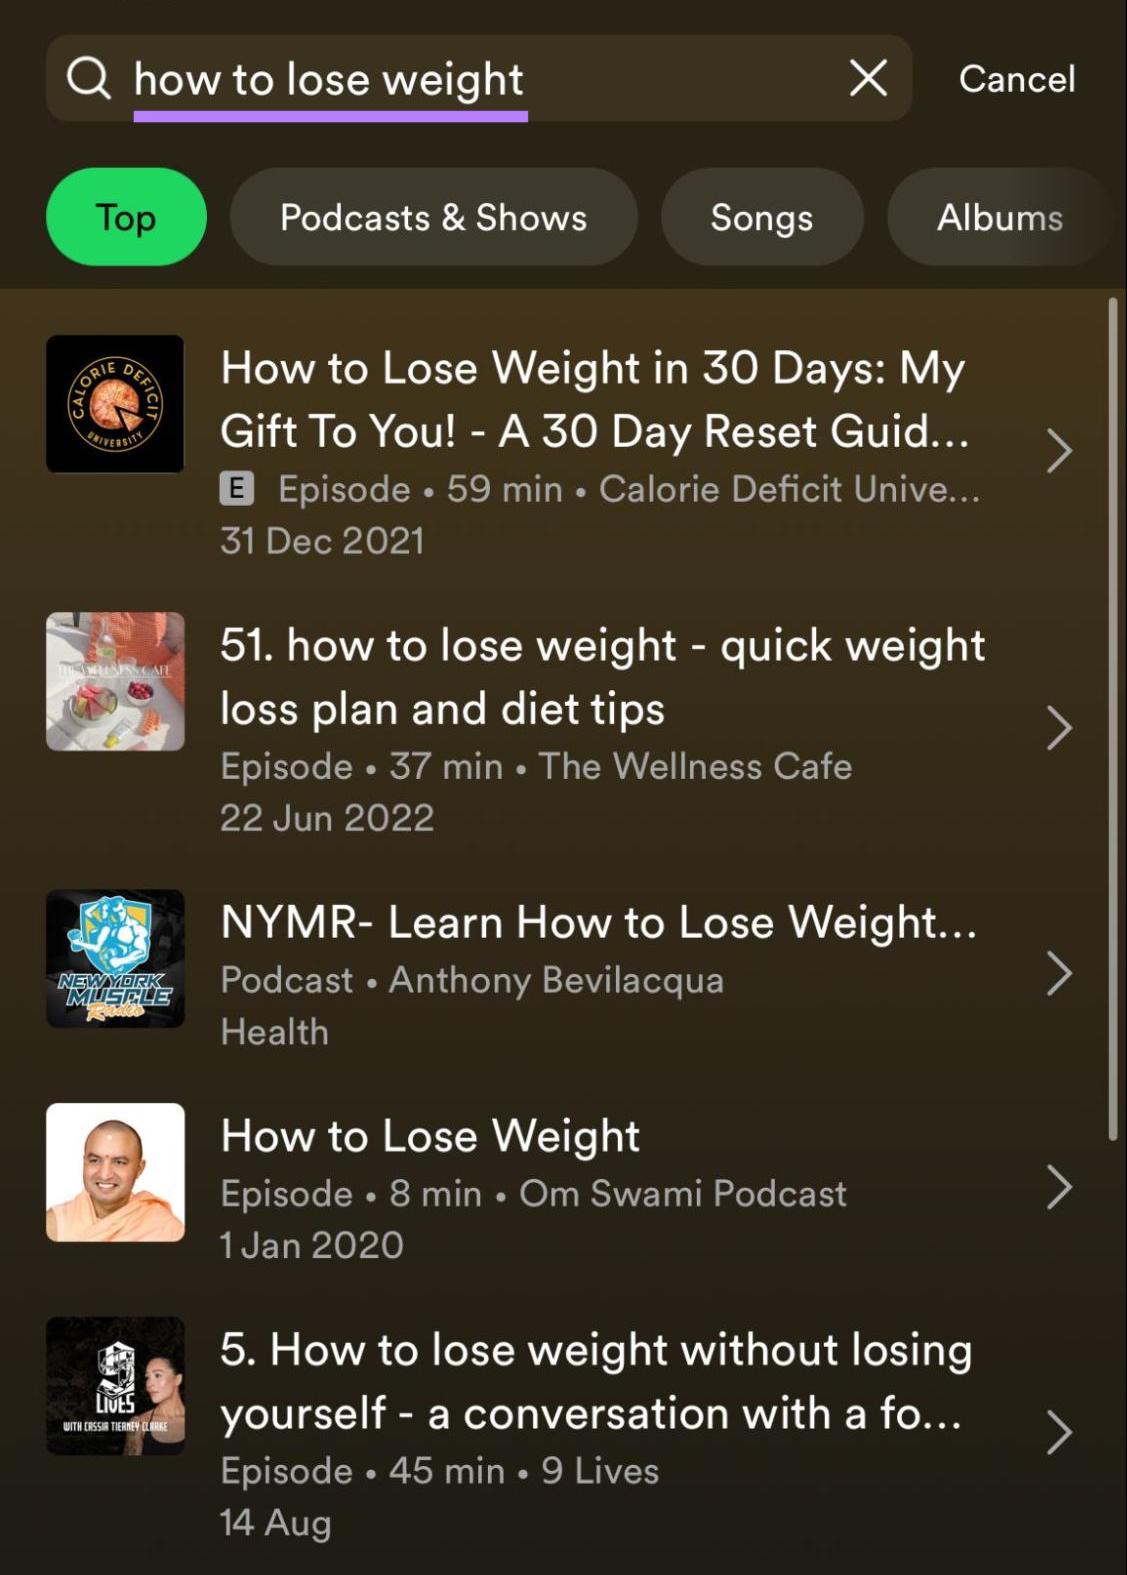 Spotify’s search result for the keyword “how to lose weight”